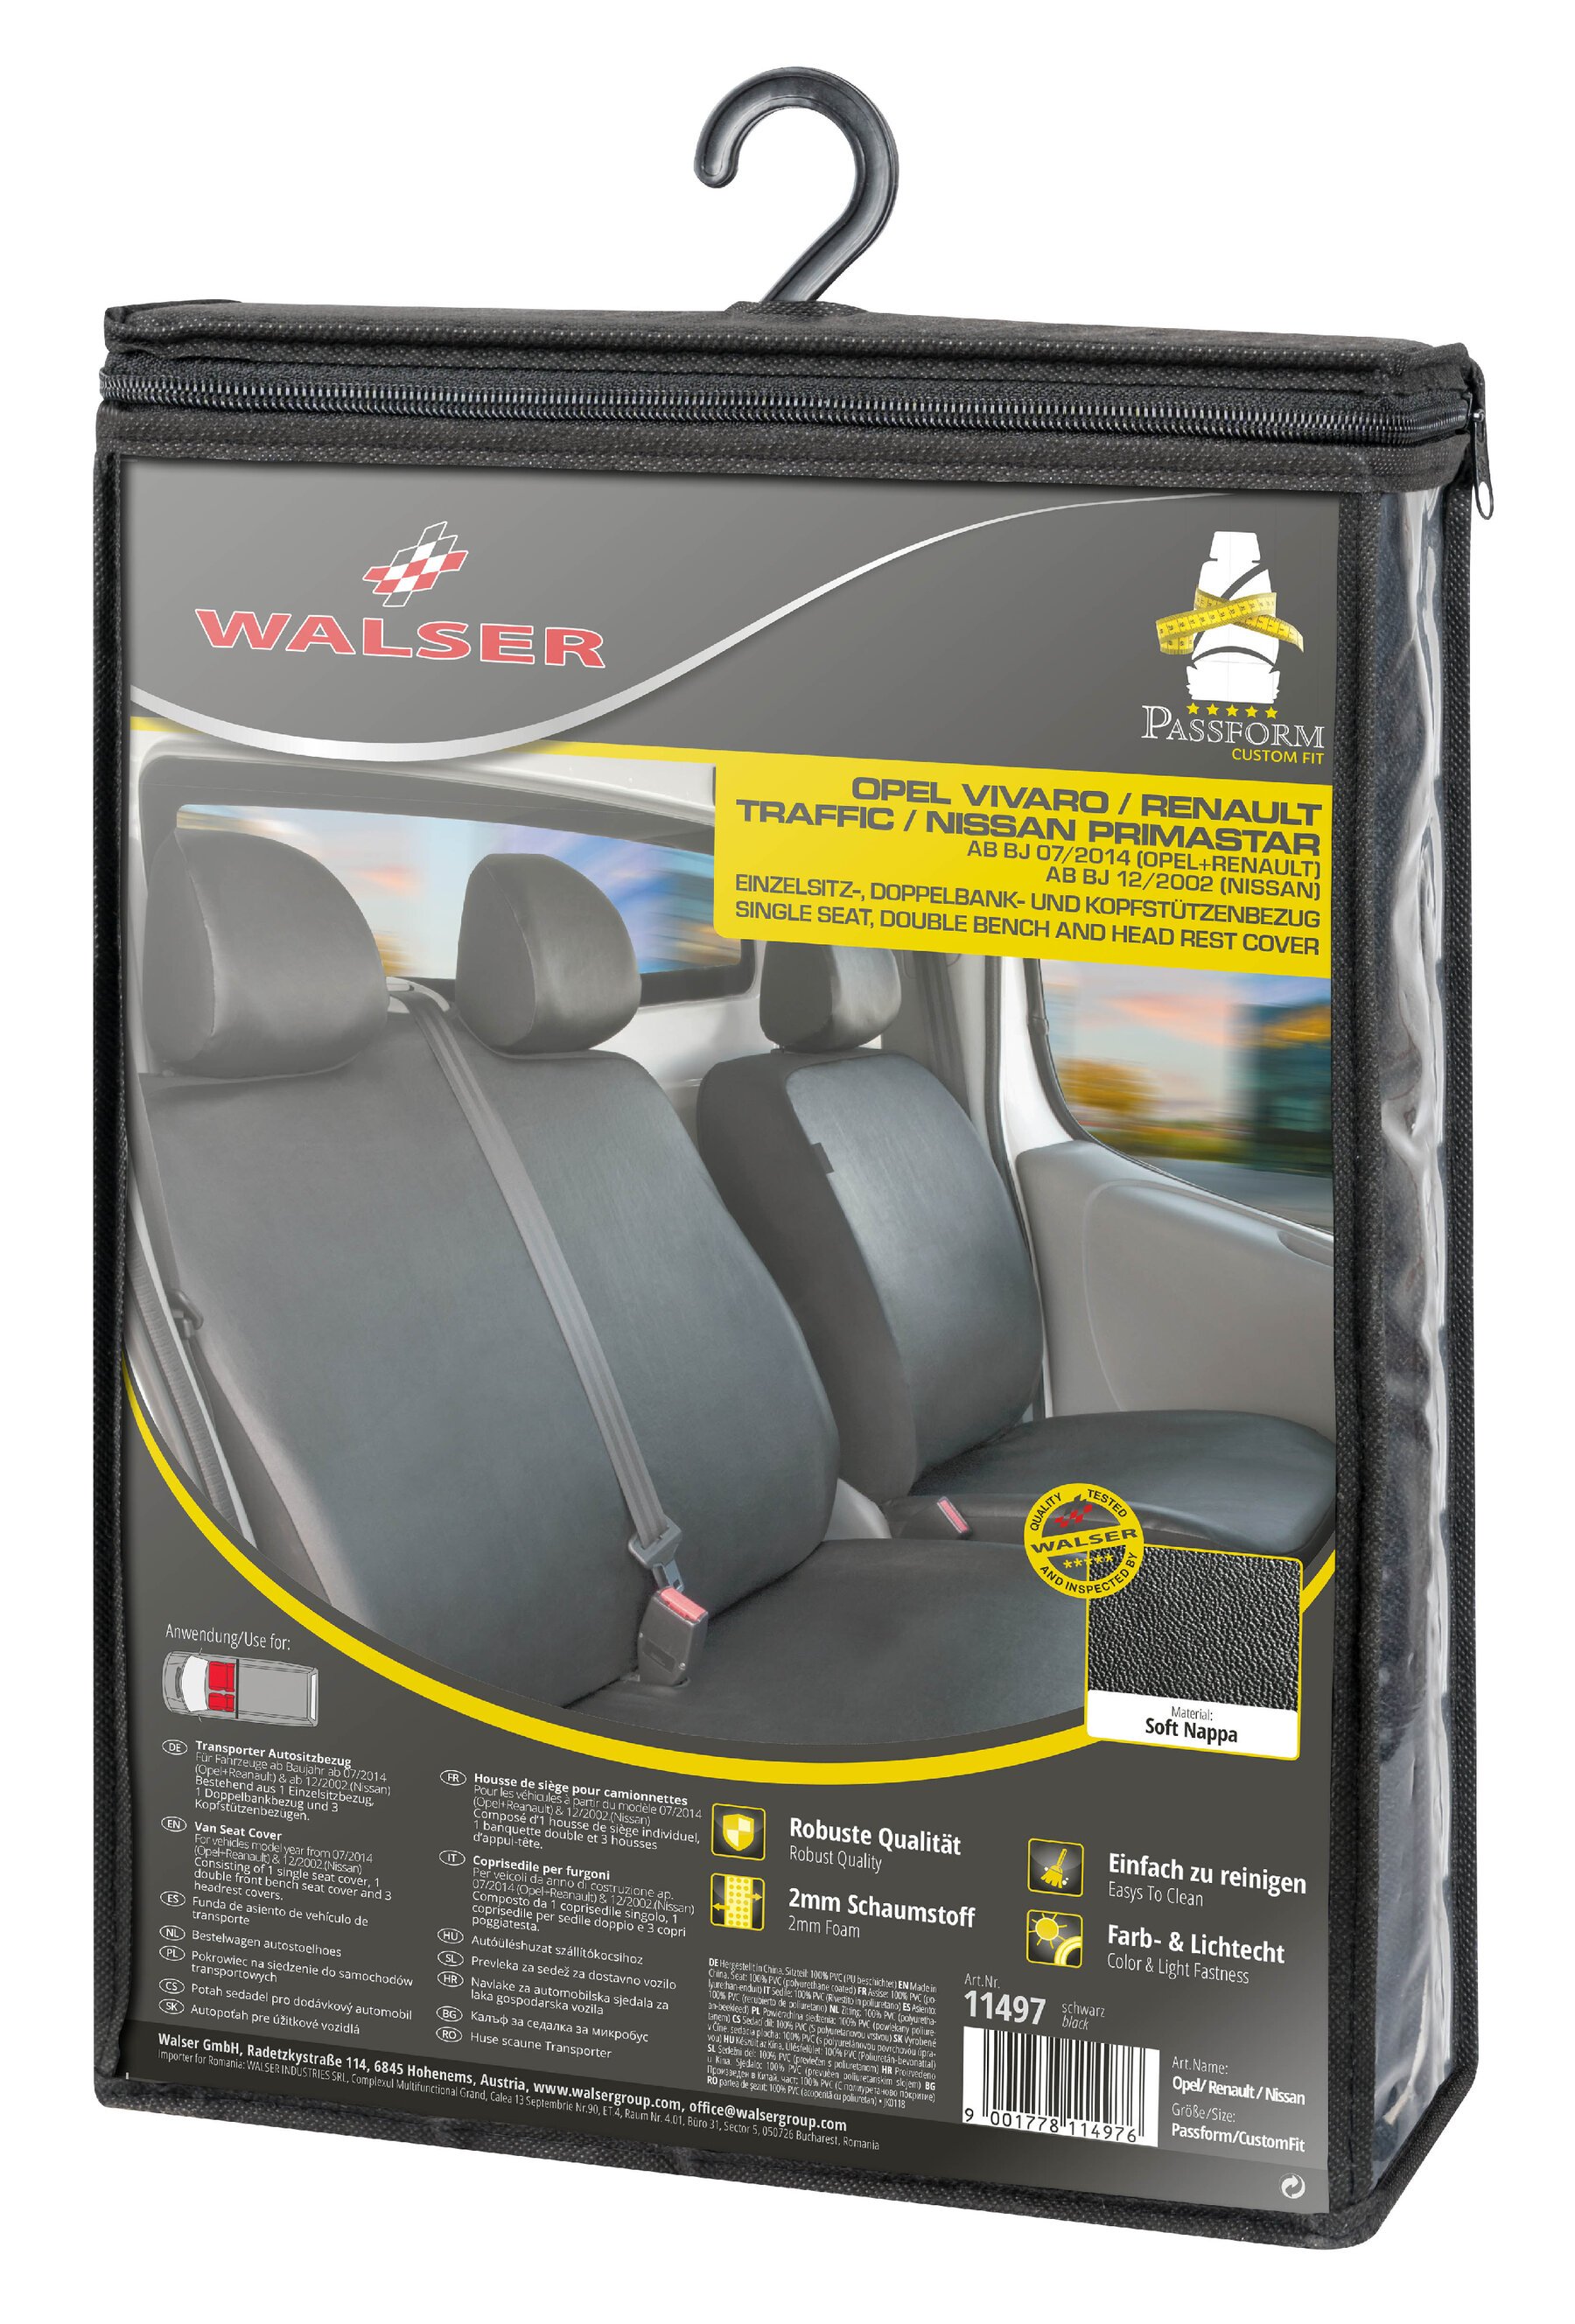 Car Seat cover Transporter made of imitation leather for Renault Trafic II, Opel Vivaro, Nissan Primastar, single & double seat